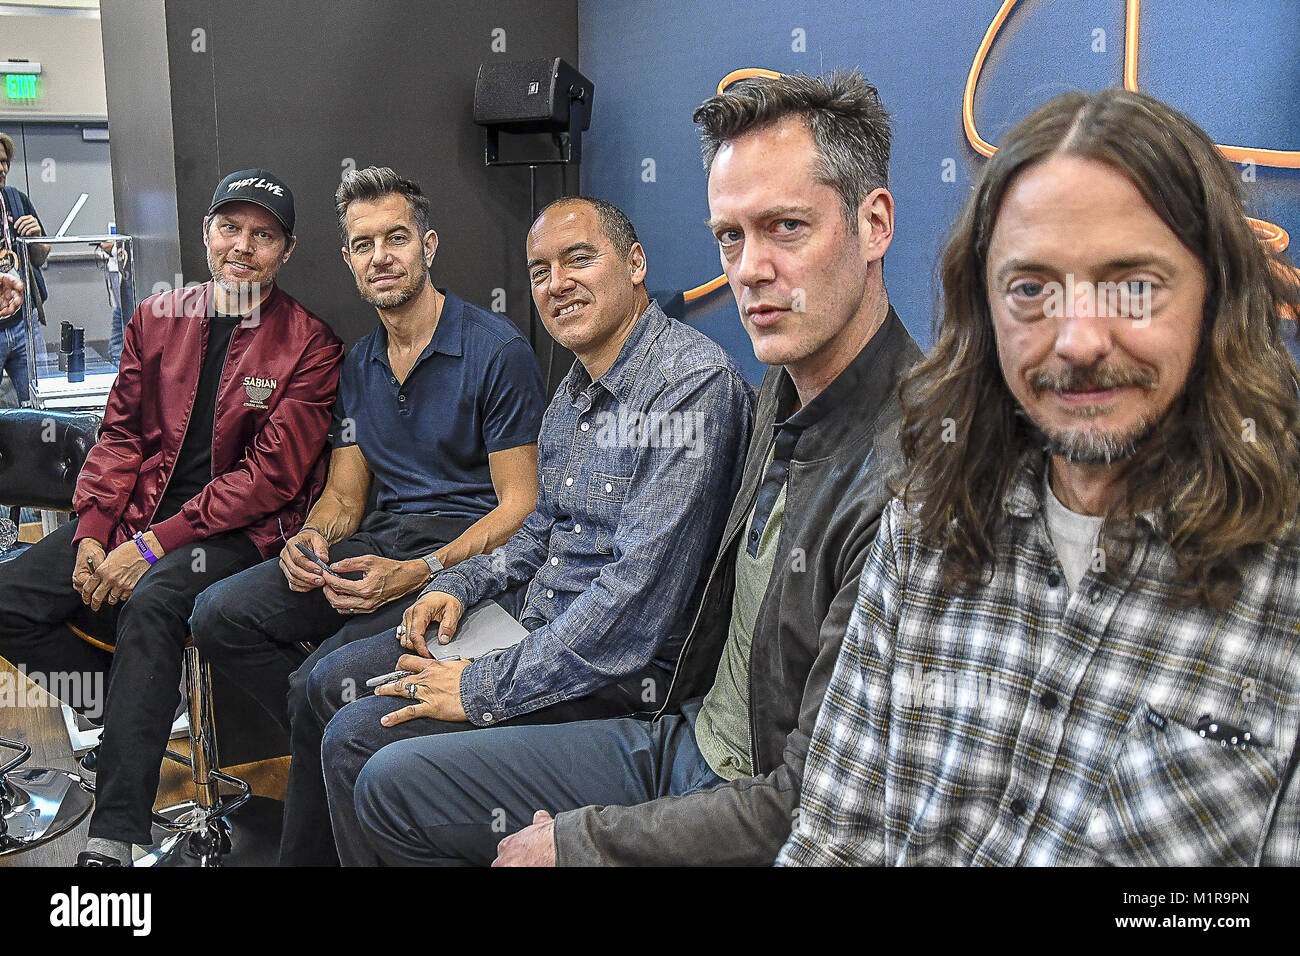 Anaheim, CA, USA. 25th Jan, 2018. The Band LIT at the Beyerdynamic Inc.  Booth for the 2018 Annual NAMM Show, the global business convention for the  music industry. Credit: Dave Safley/ZUMA Wire/Alamy